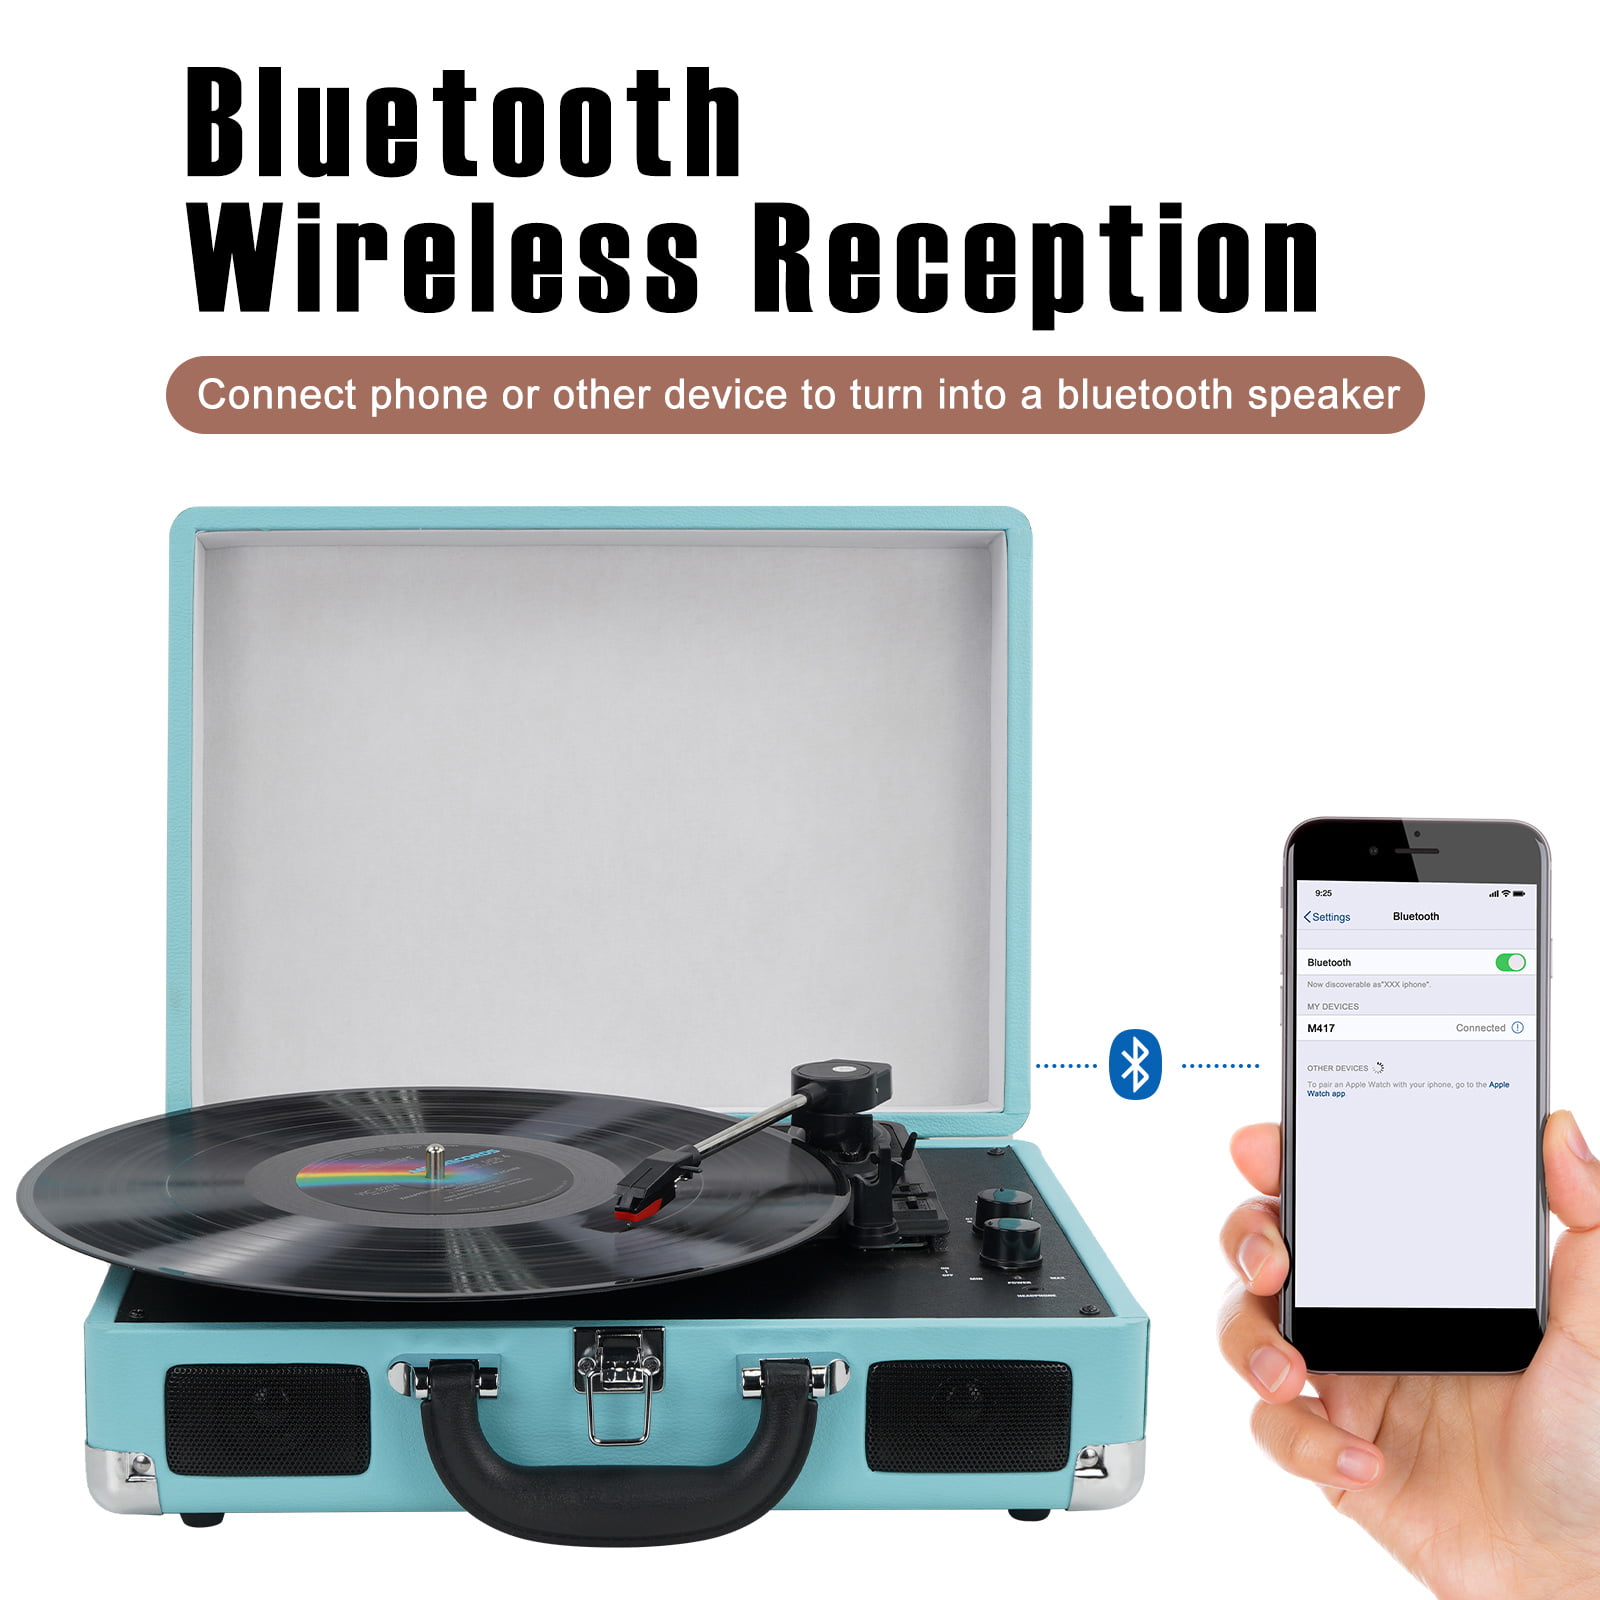 DIGITNOW Bluetooth Record Player, 3-Speed Turntable with Stereo Speakers,  Converts LPs to MP3, Support FM Radio,Remote Control, USB  Encoding,one-Click